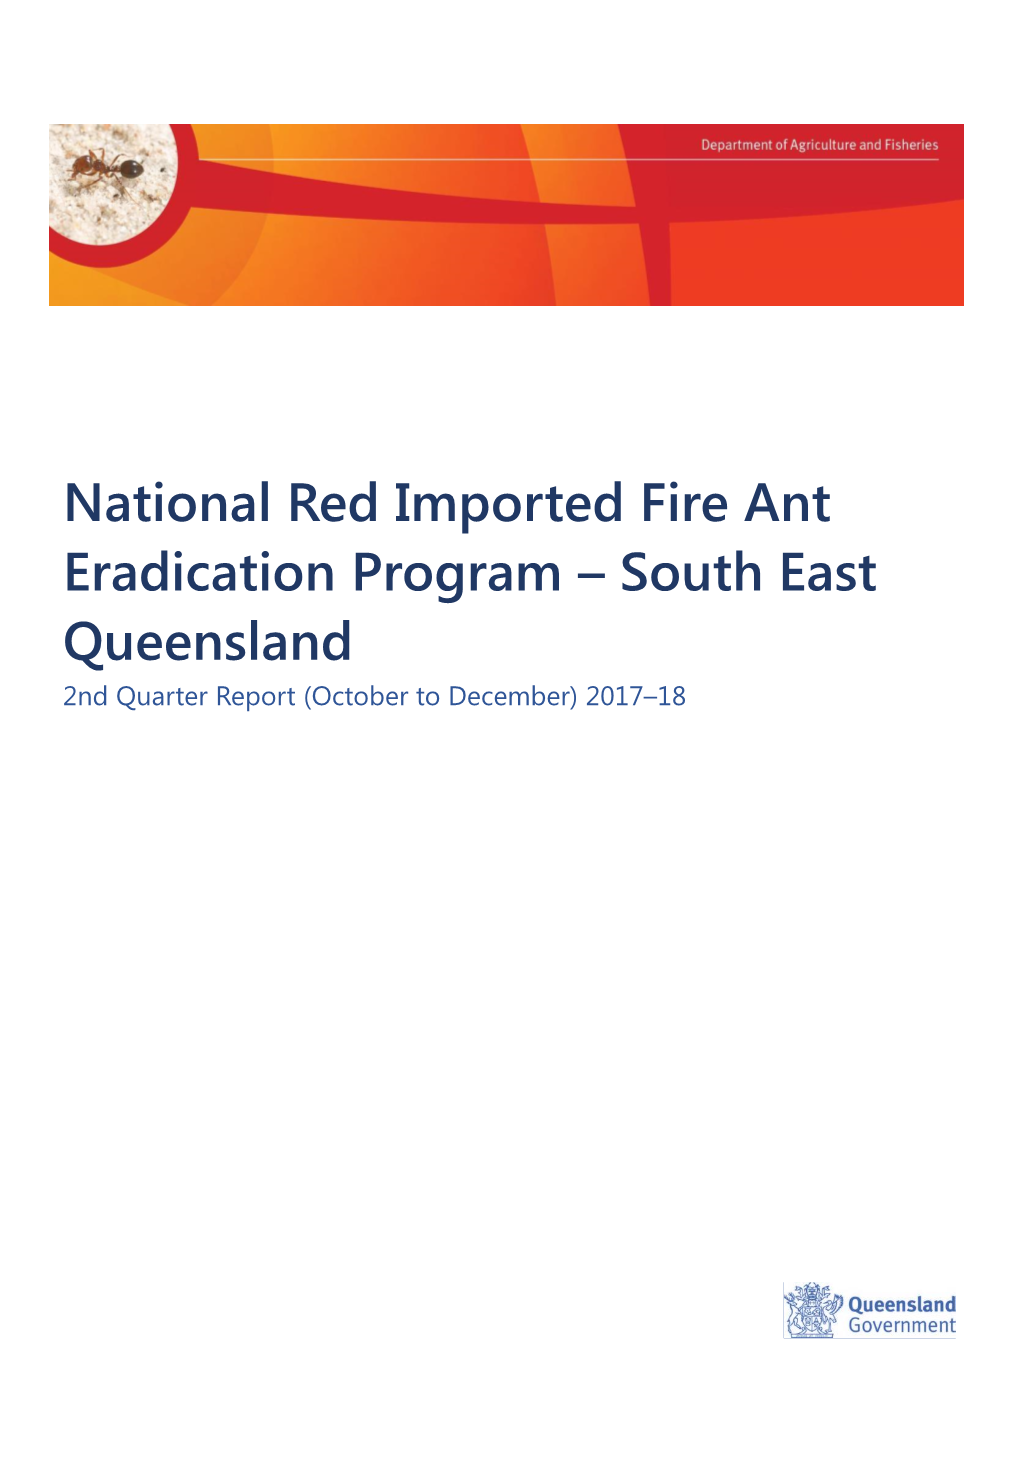 National Red Imported Fire Ant Eradication Program